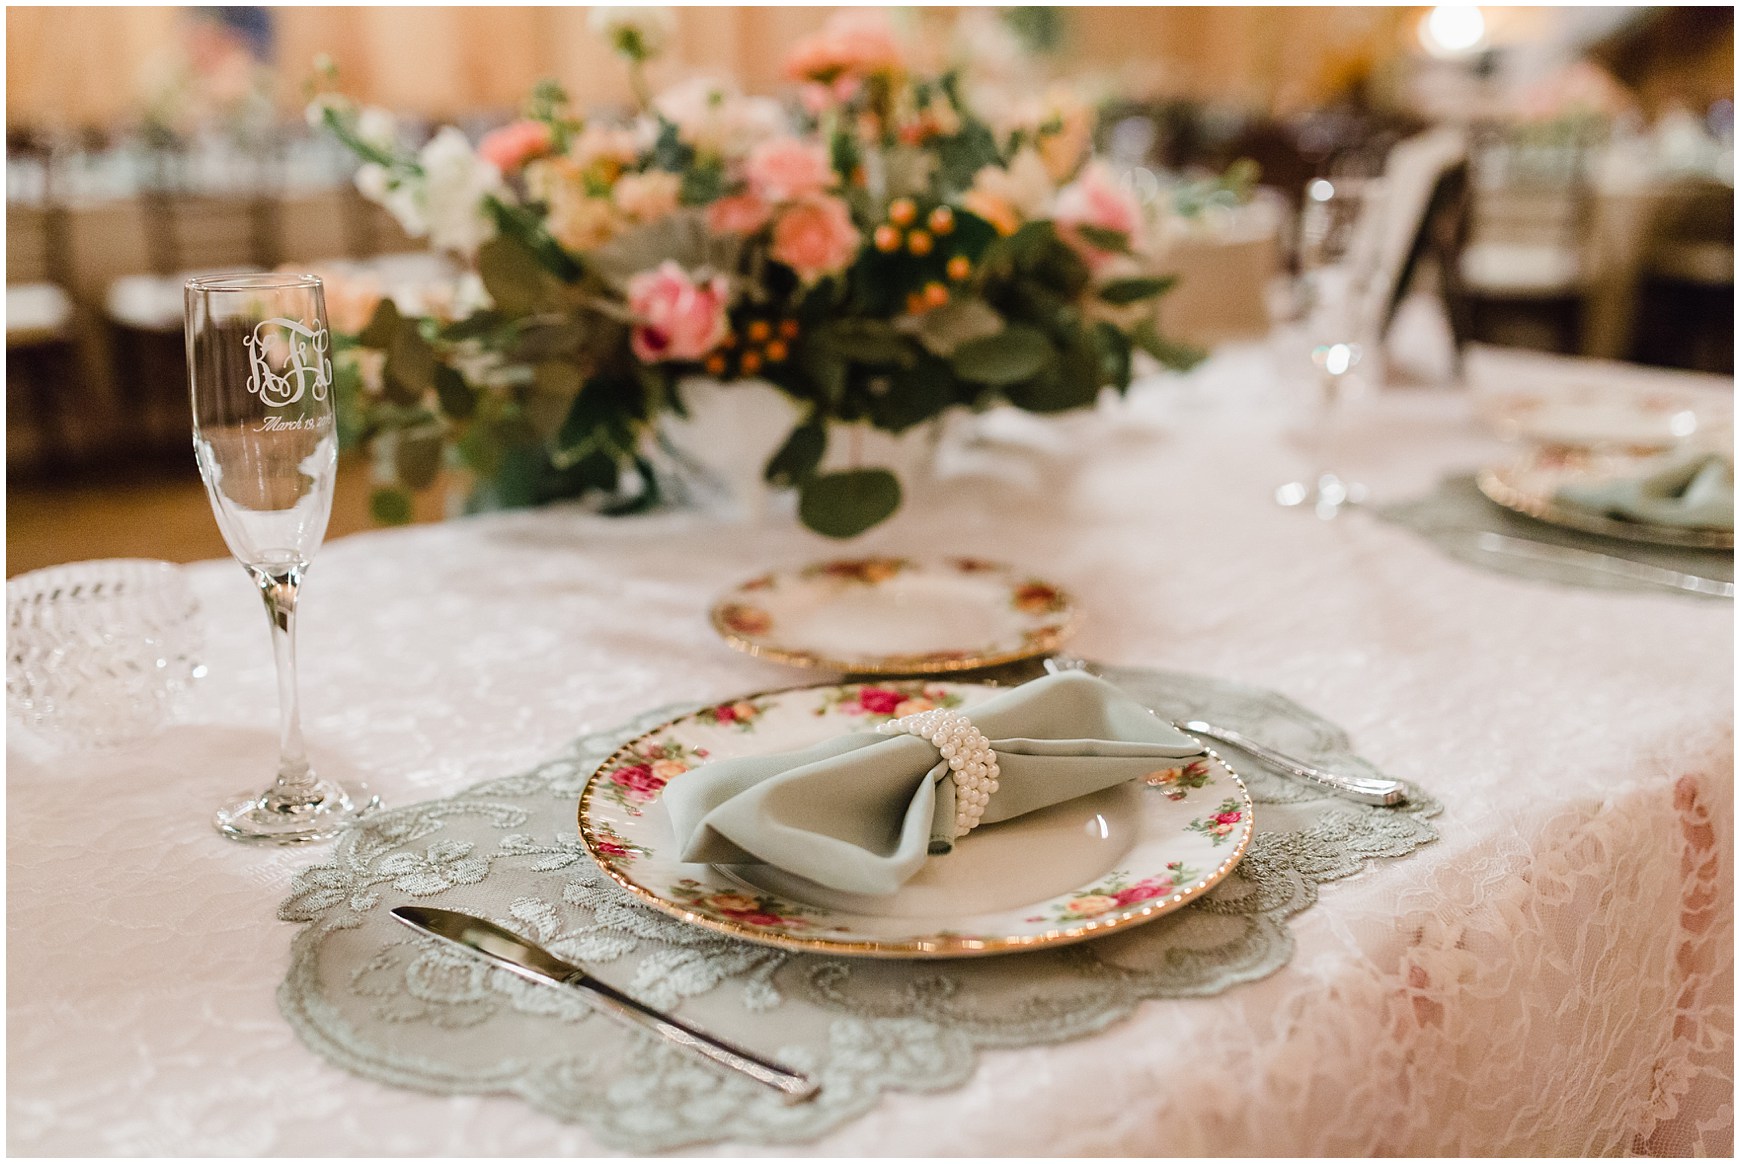 Beautiful Wedding details and place settings 